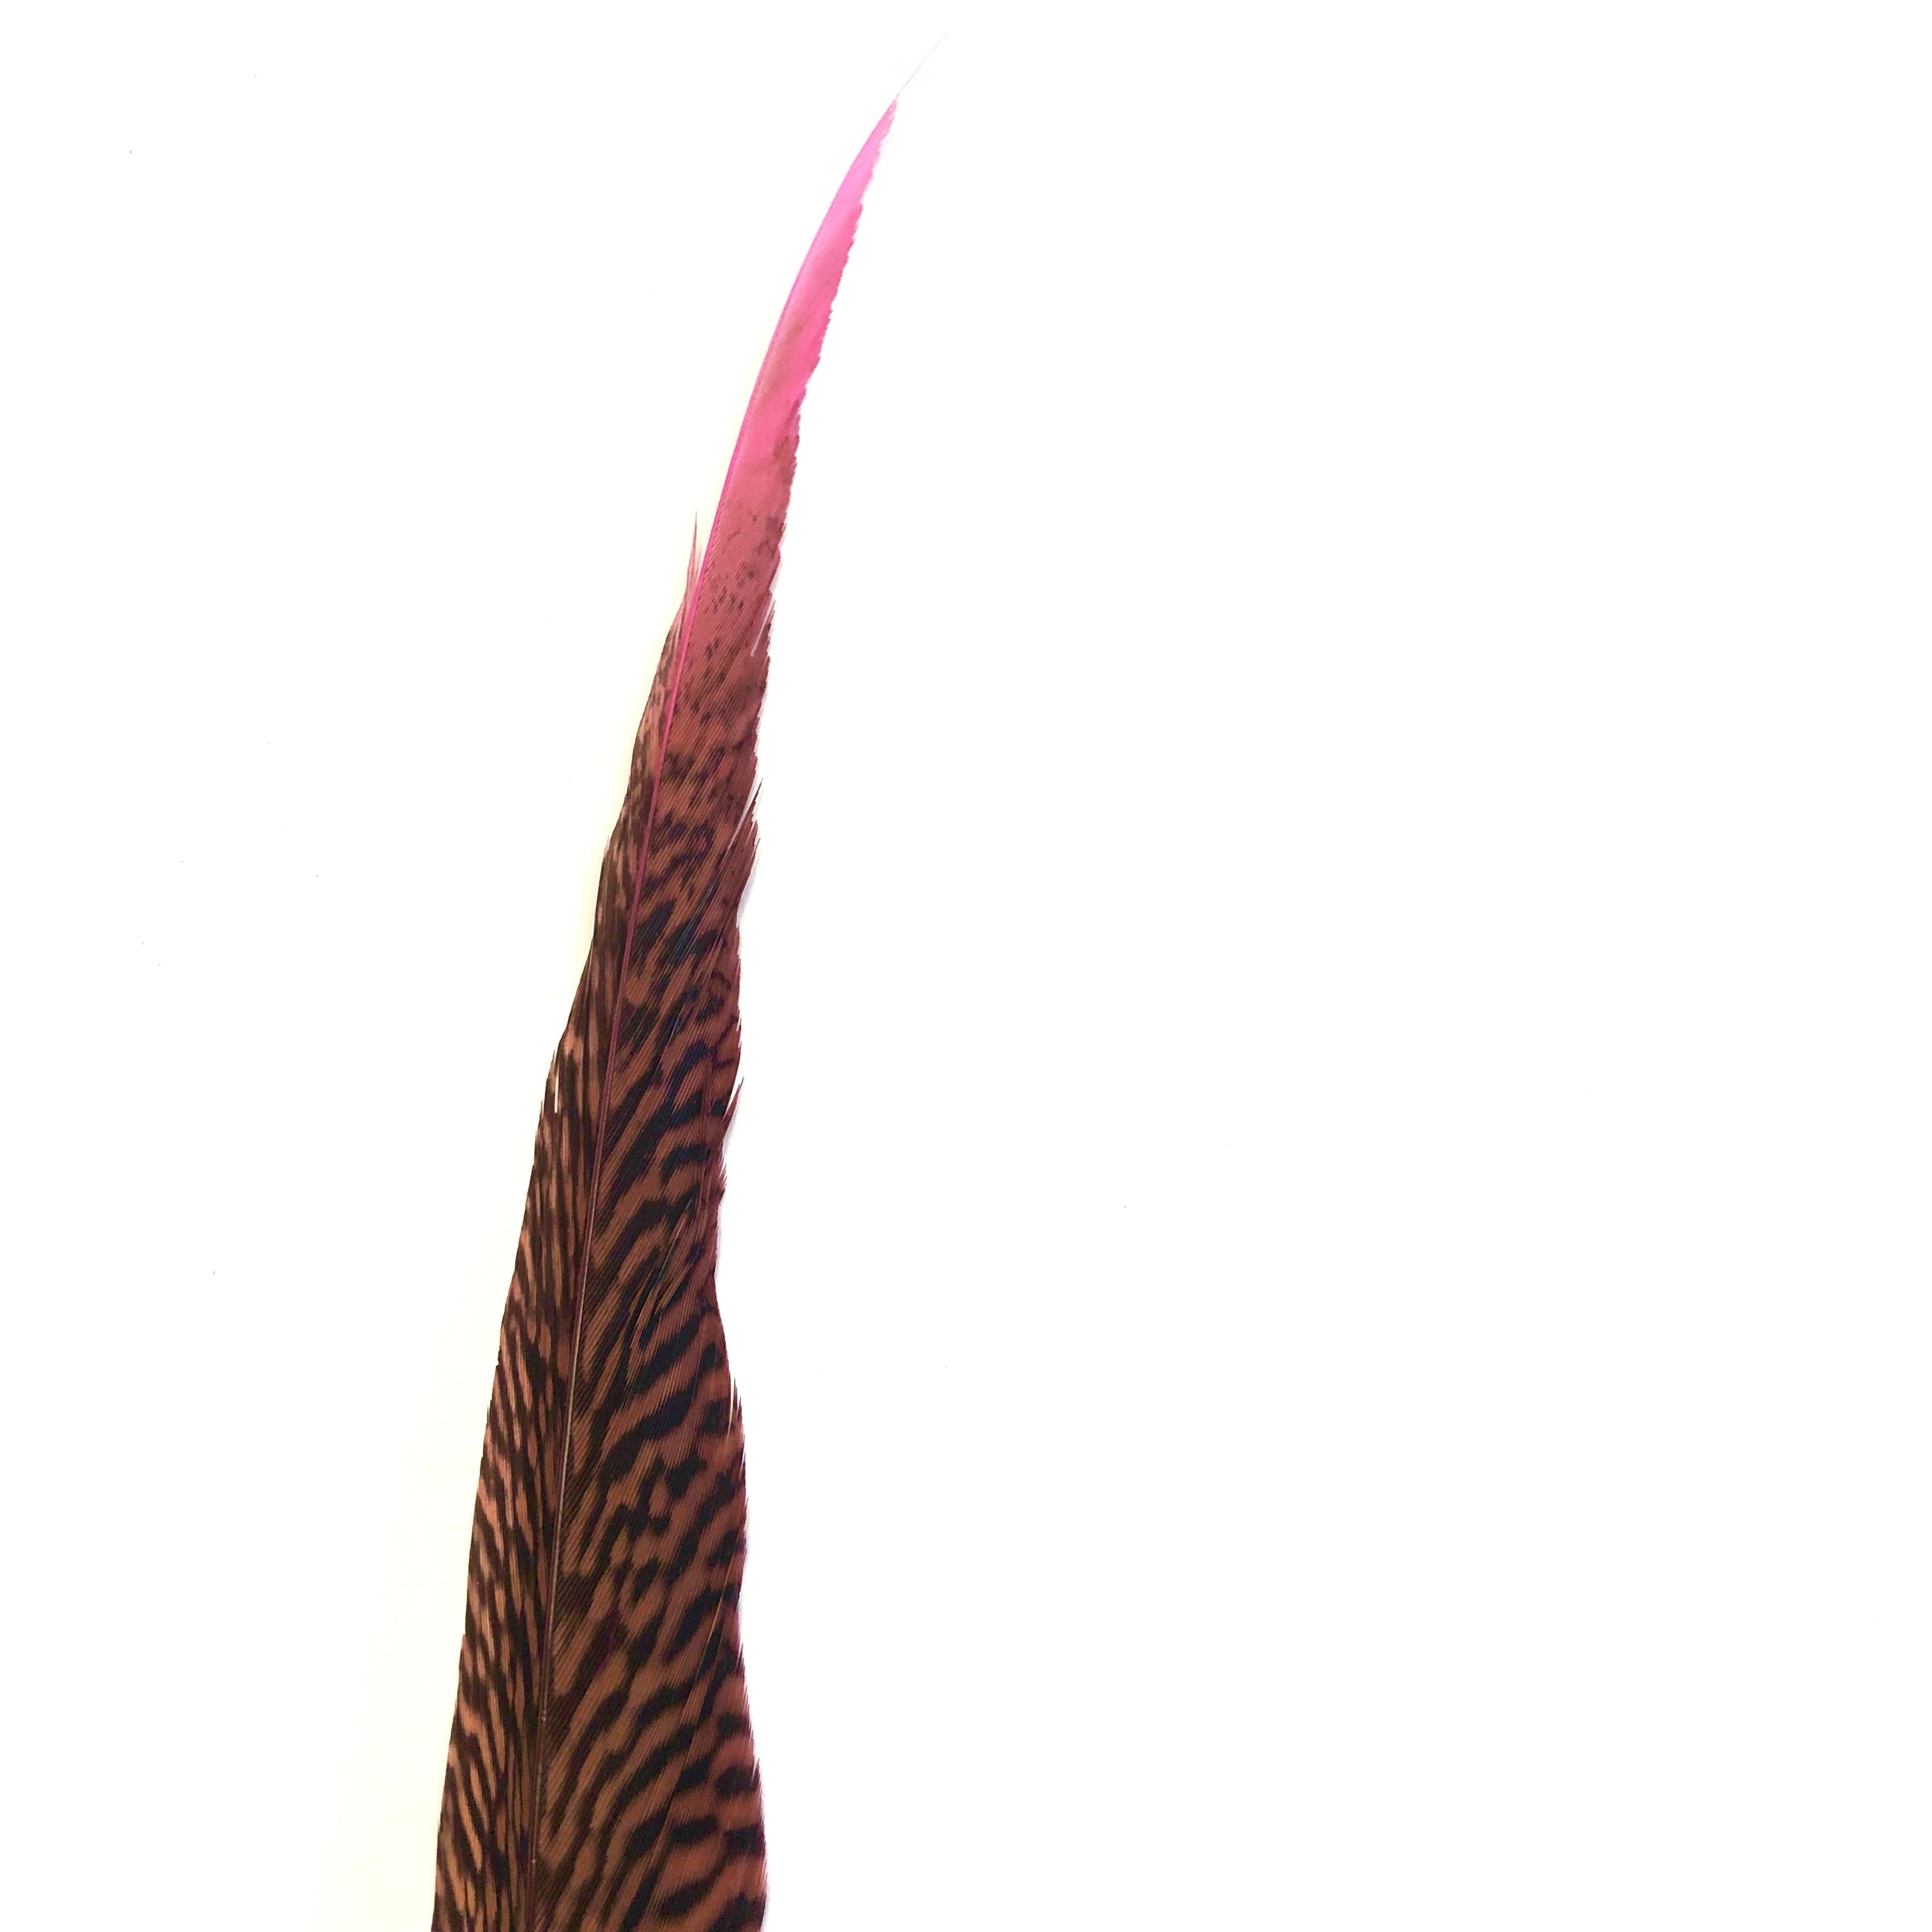 20" to 30" Golden Pheasant Side Tail Feather x 10 pcs - Hot Pink ((BULK PACK))